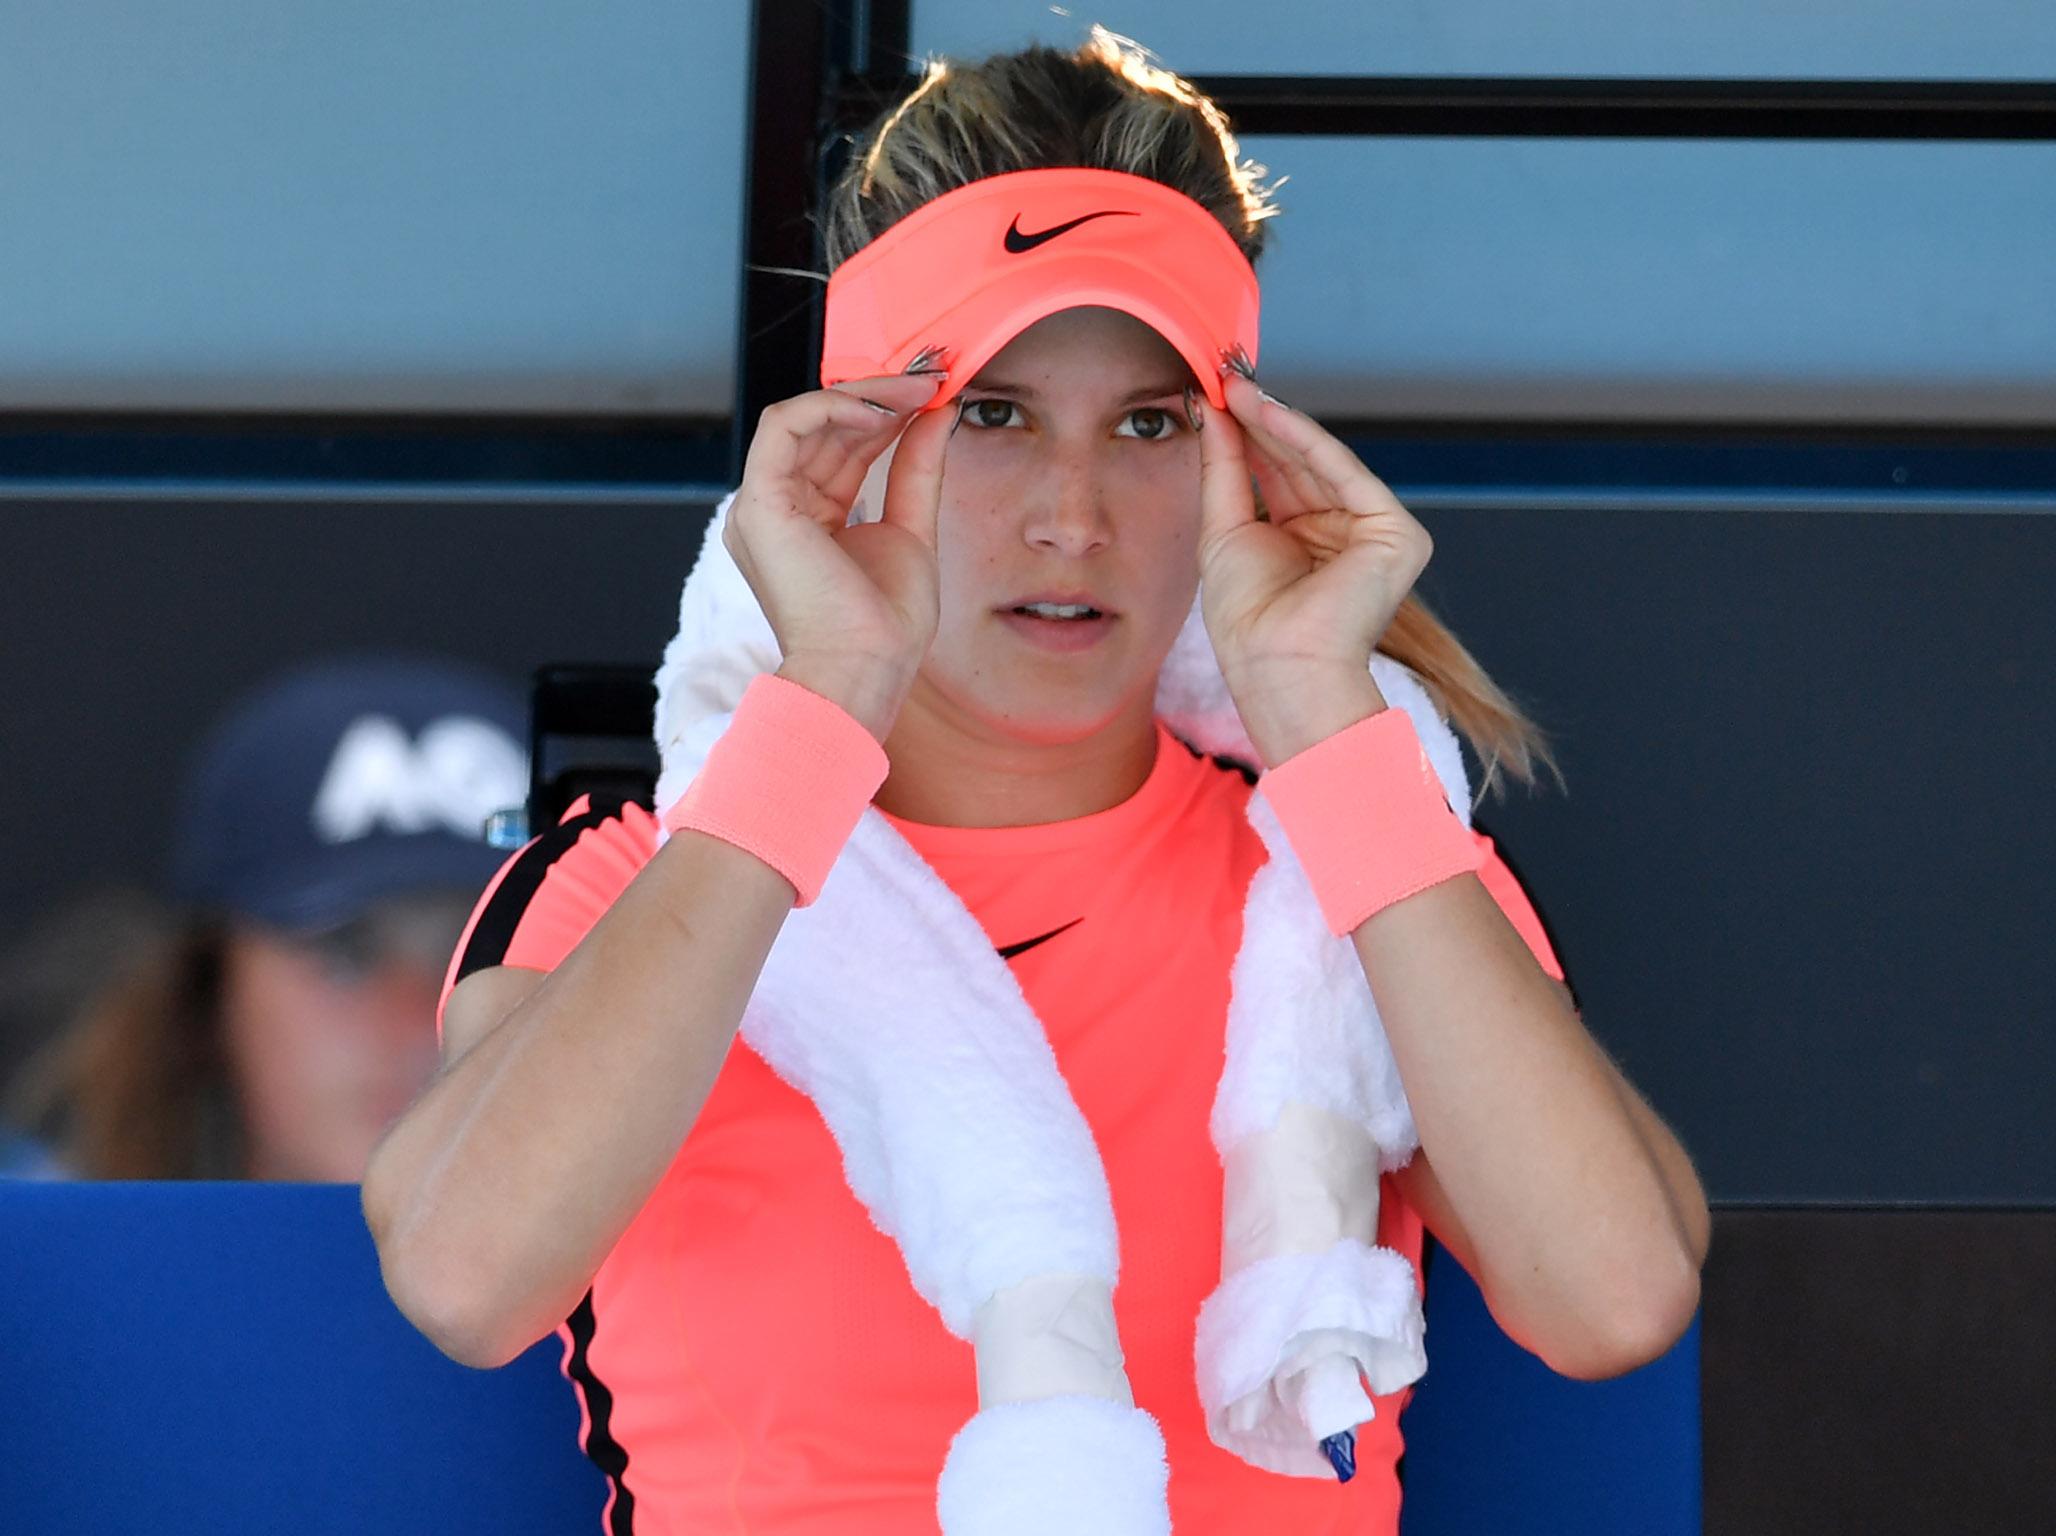 Eugenie Bouchard slipped in a US Open changing room